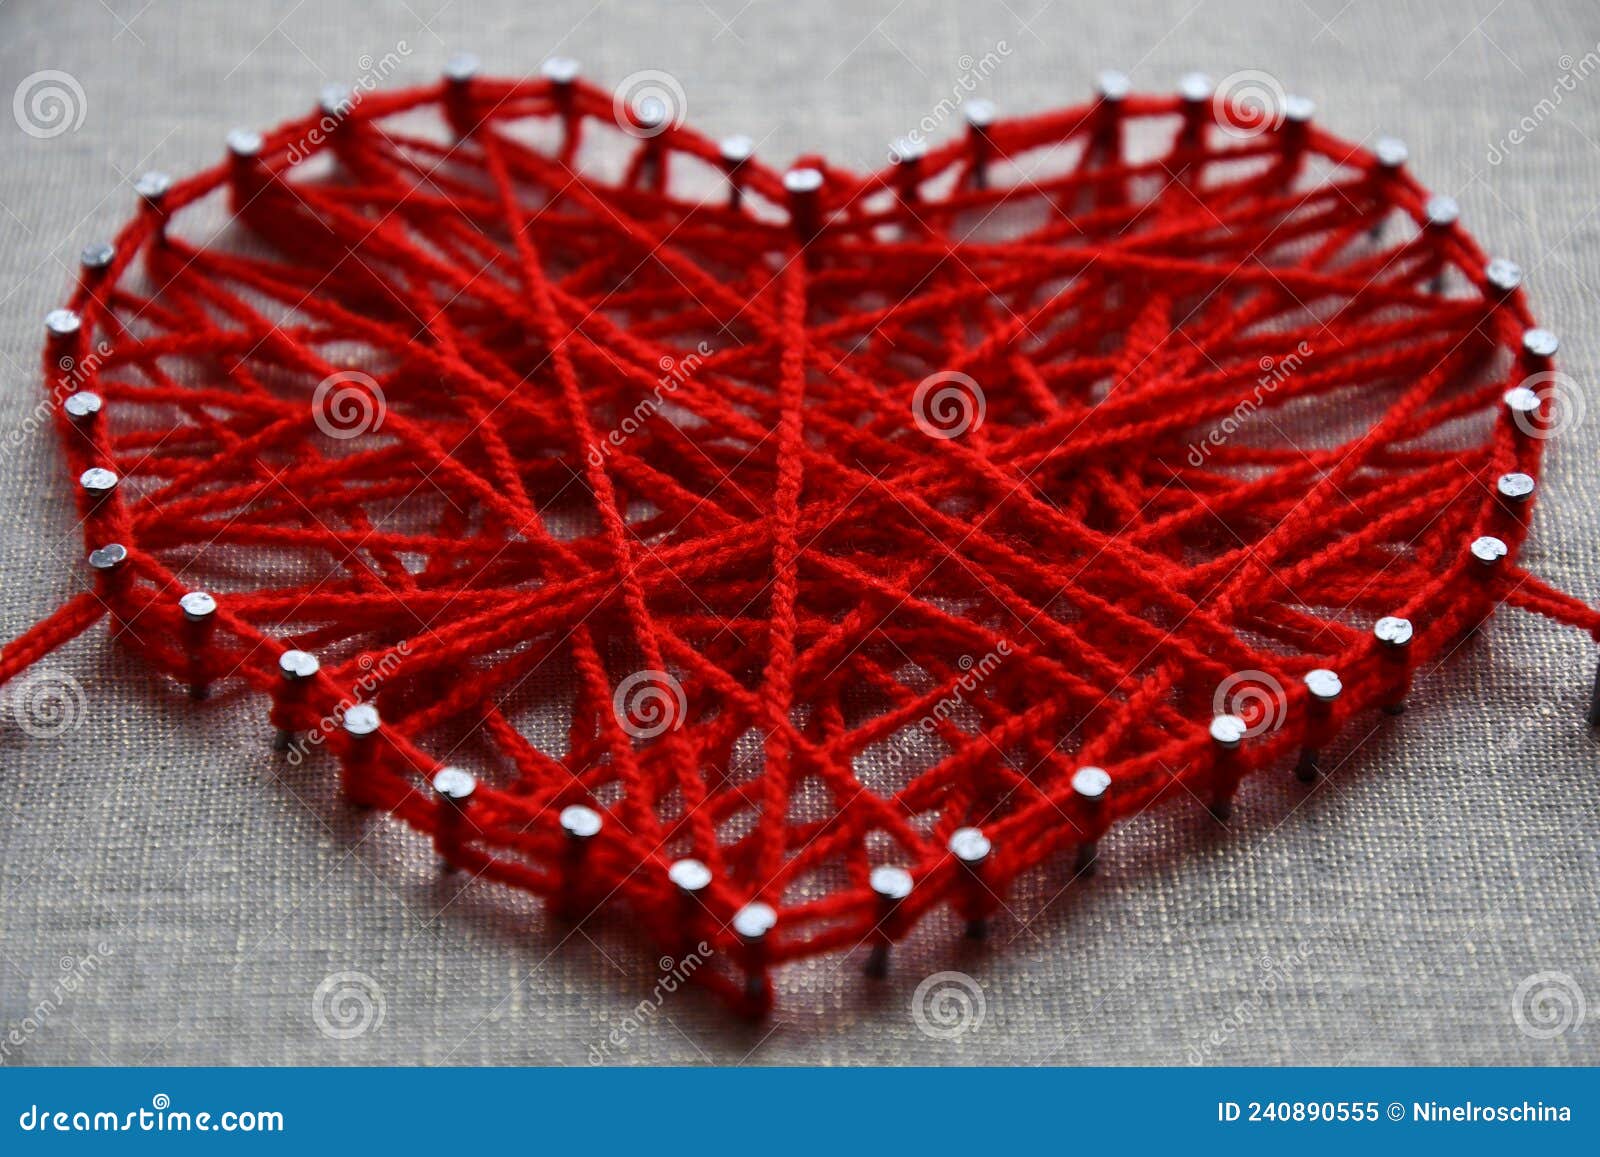 Red Heart String Art Made With Tangled Yarn On Metal Nails On Canvas  Background Stock Image - Image Of Shape, Love: 240890555